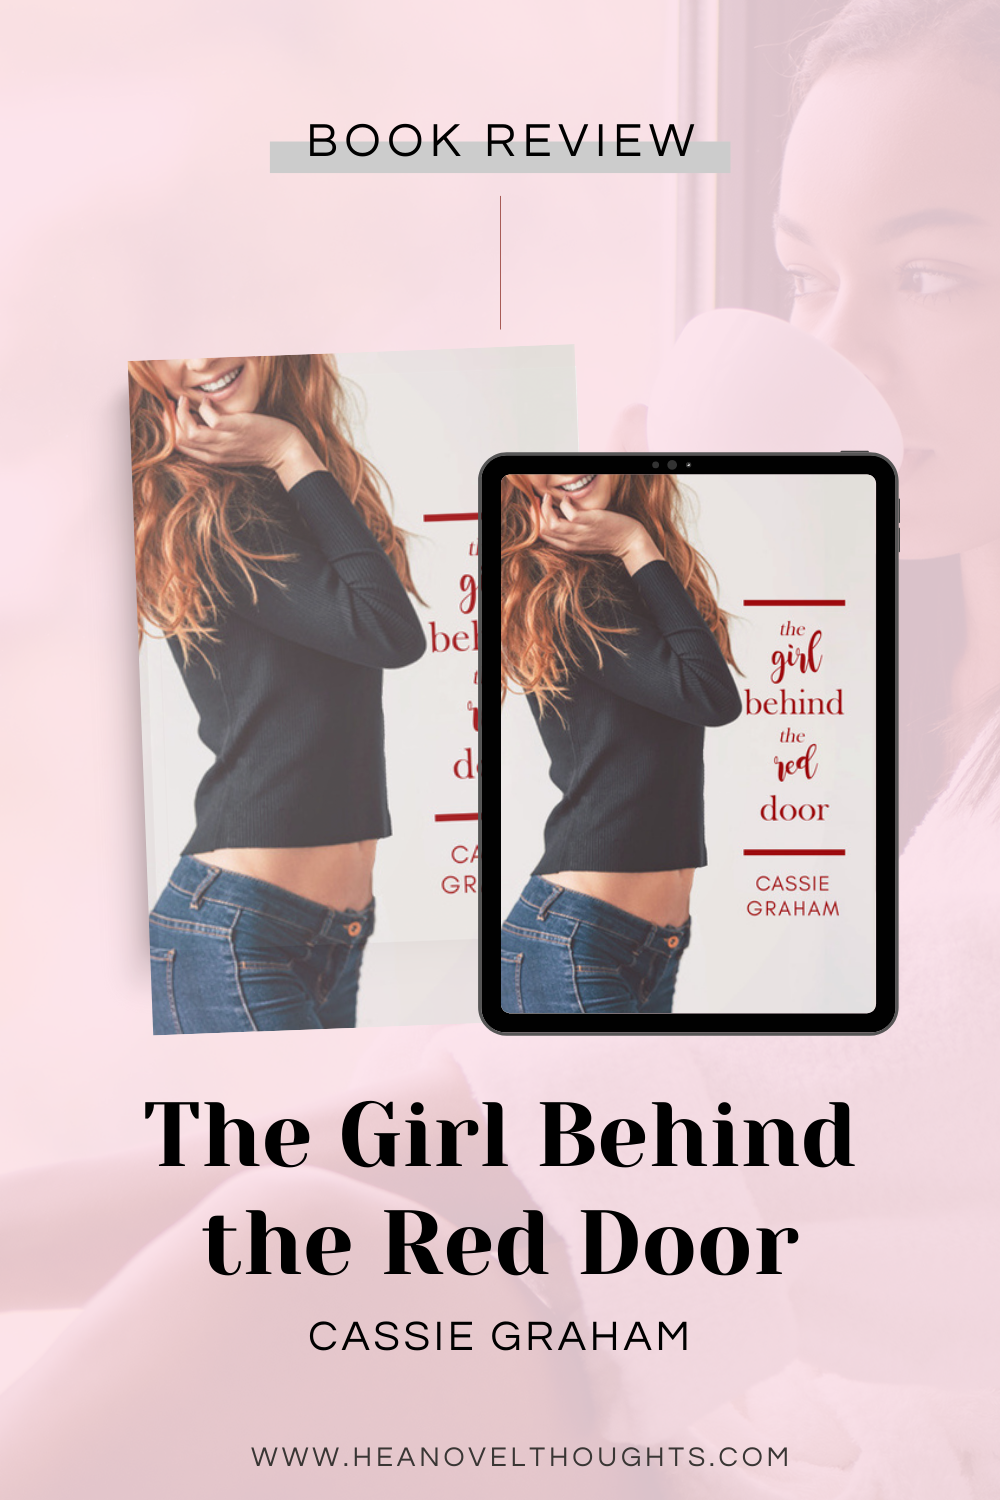 The Girl Behind the Red Door by Cassie Graham